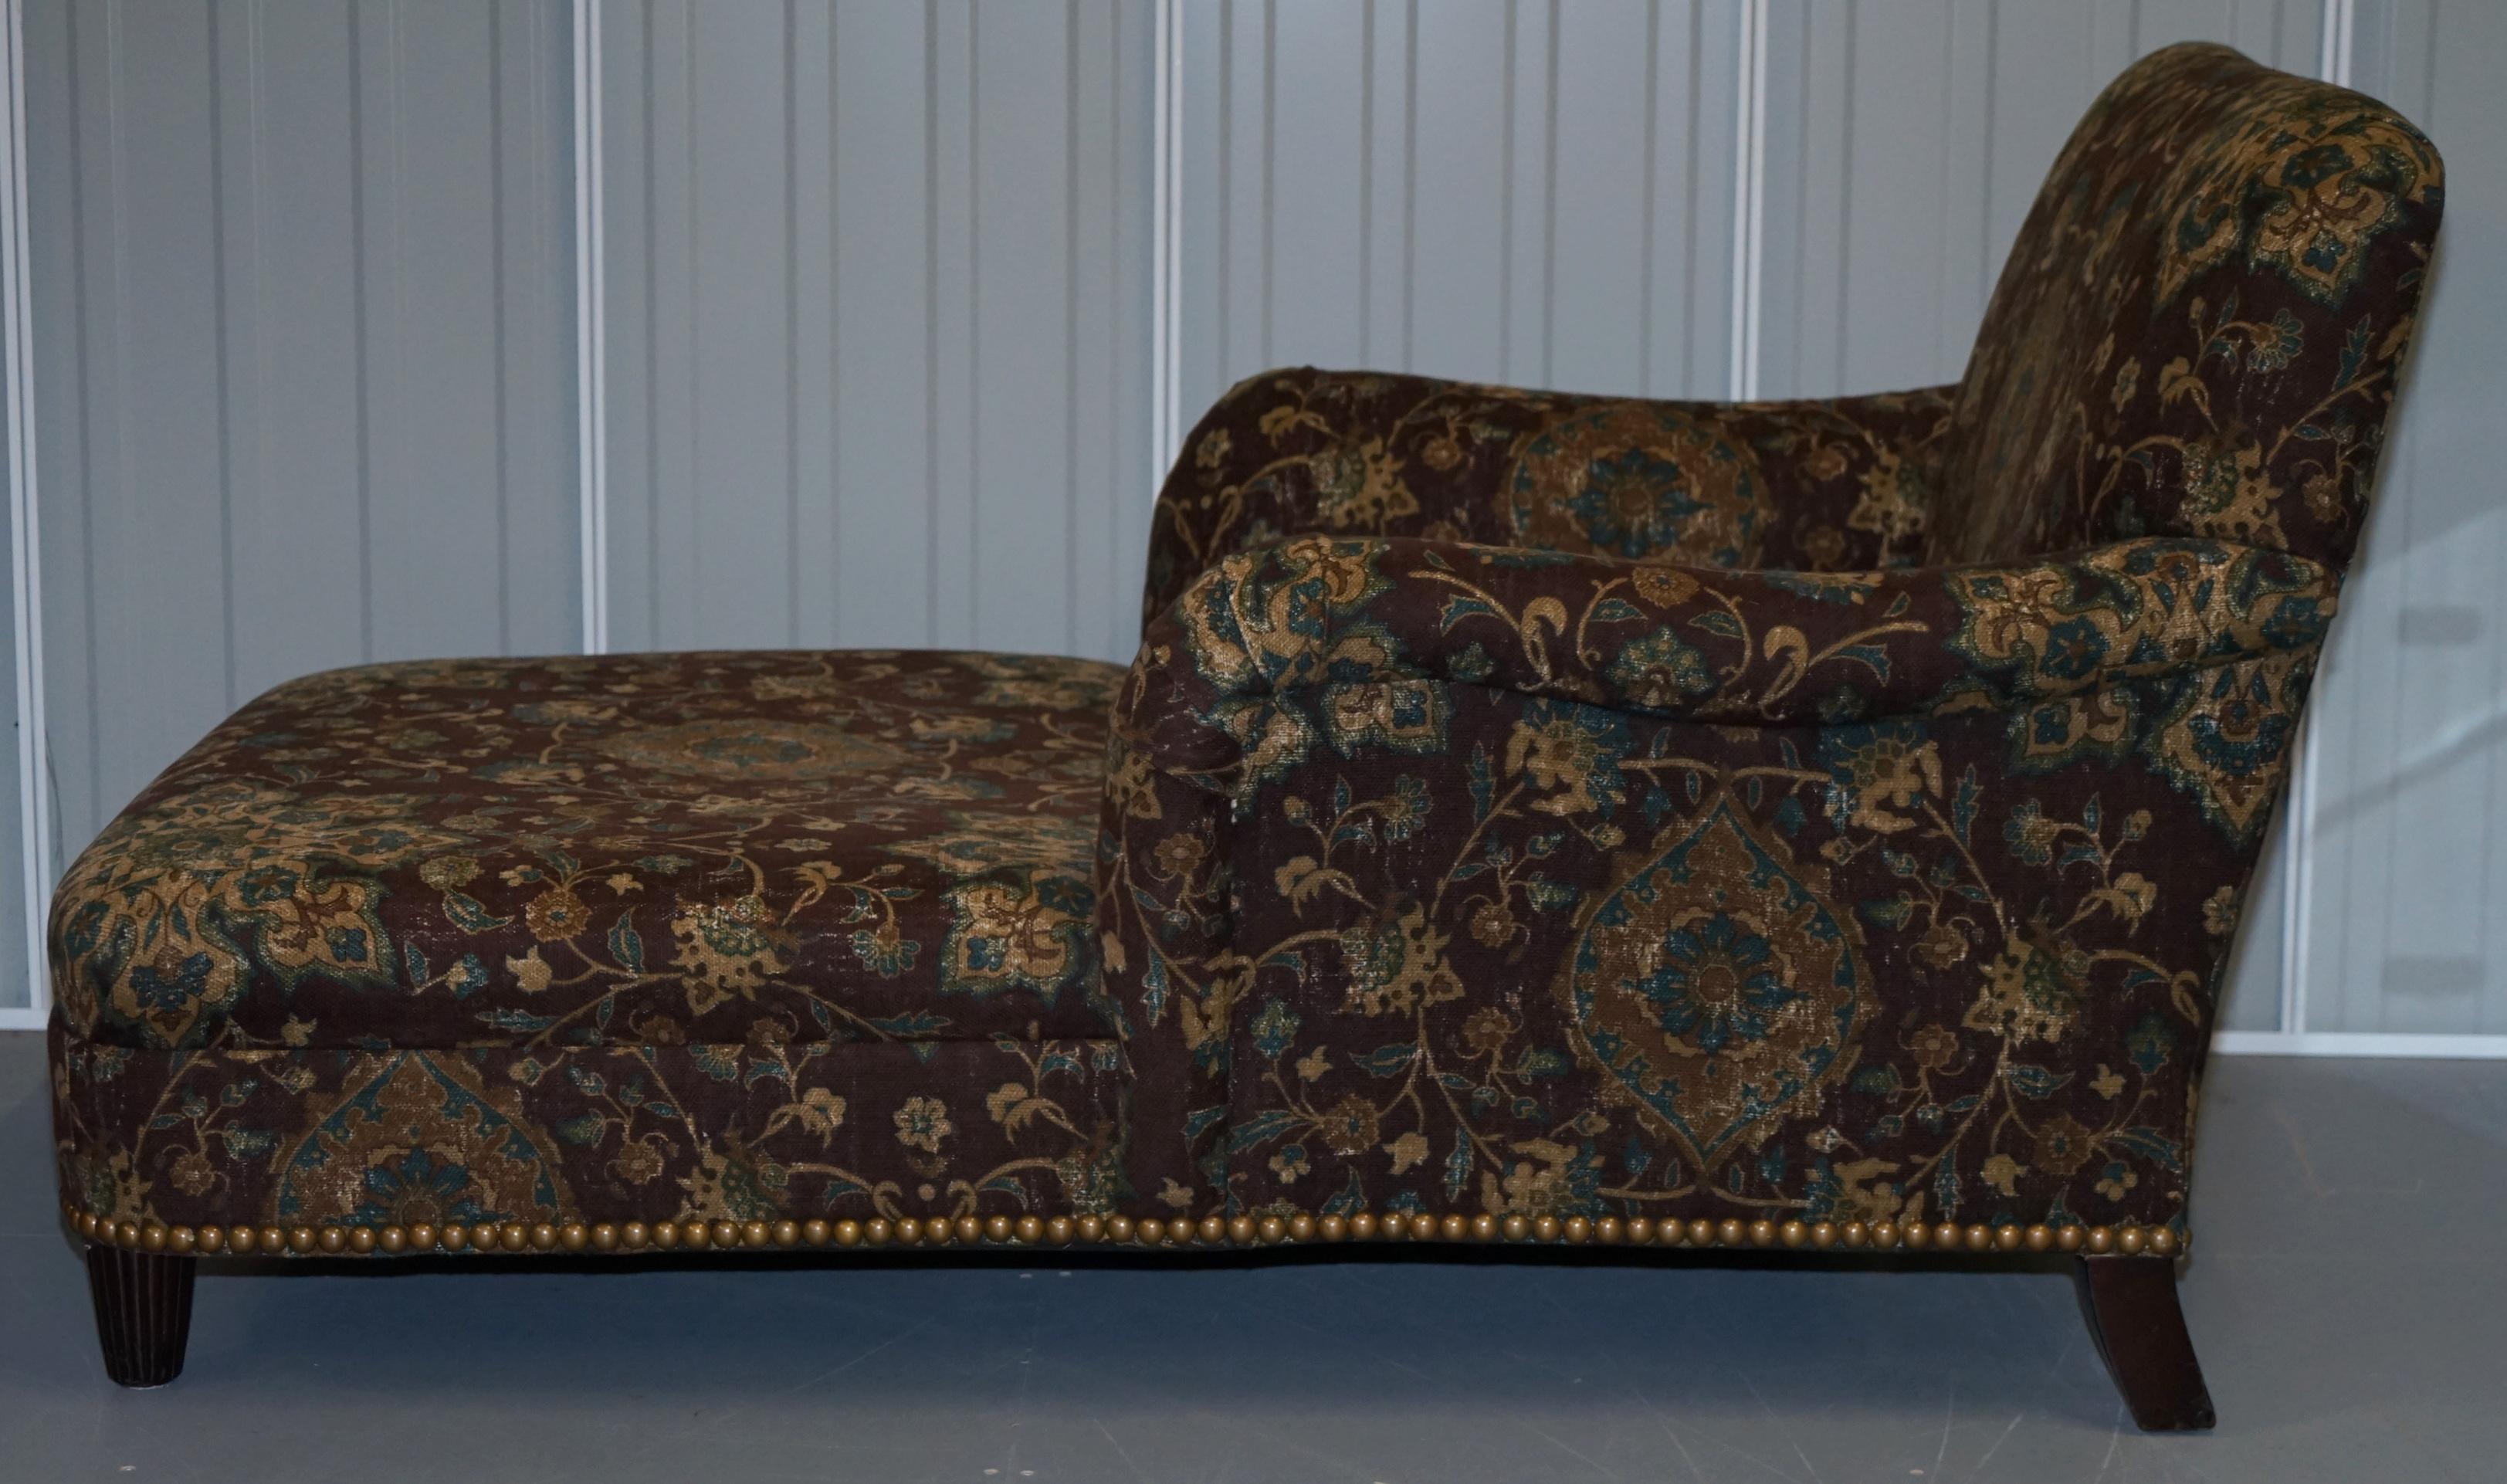 Large Oversized Ralph Lauren Chaise Lounge Sofa Armchair Floral Upholstery 9